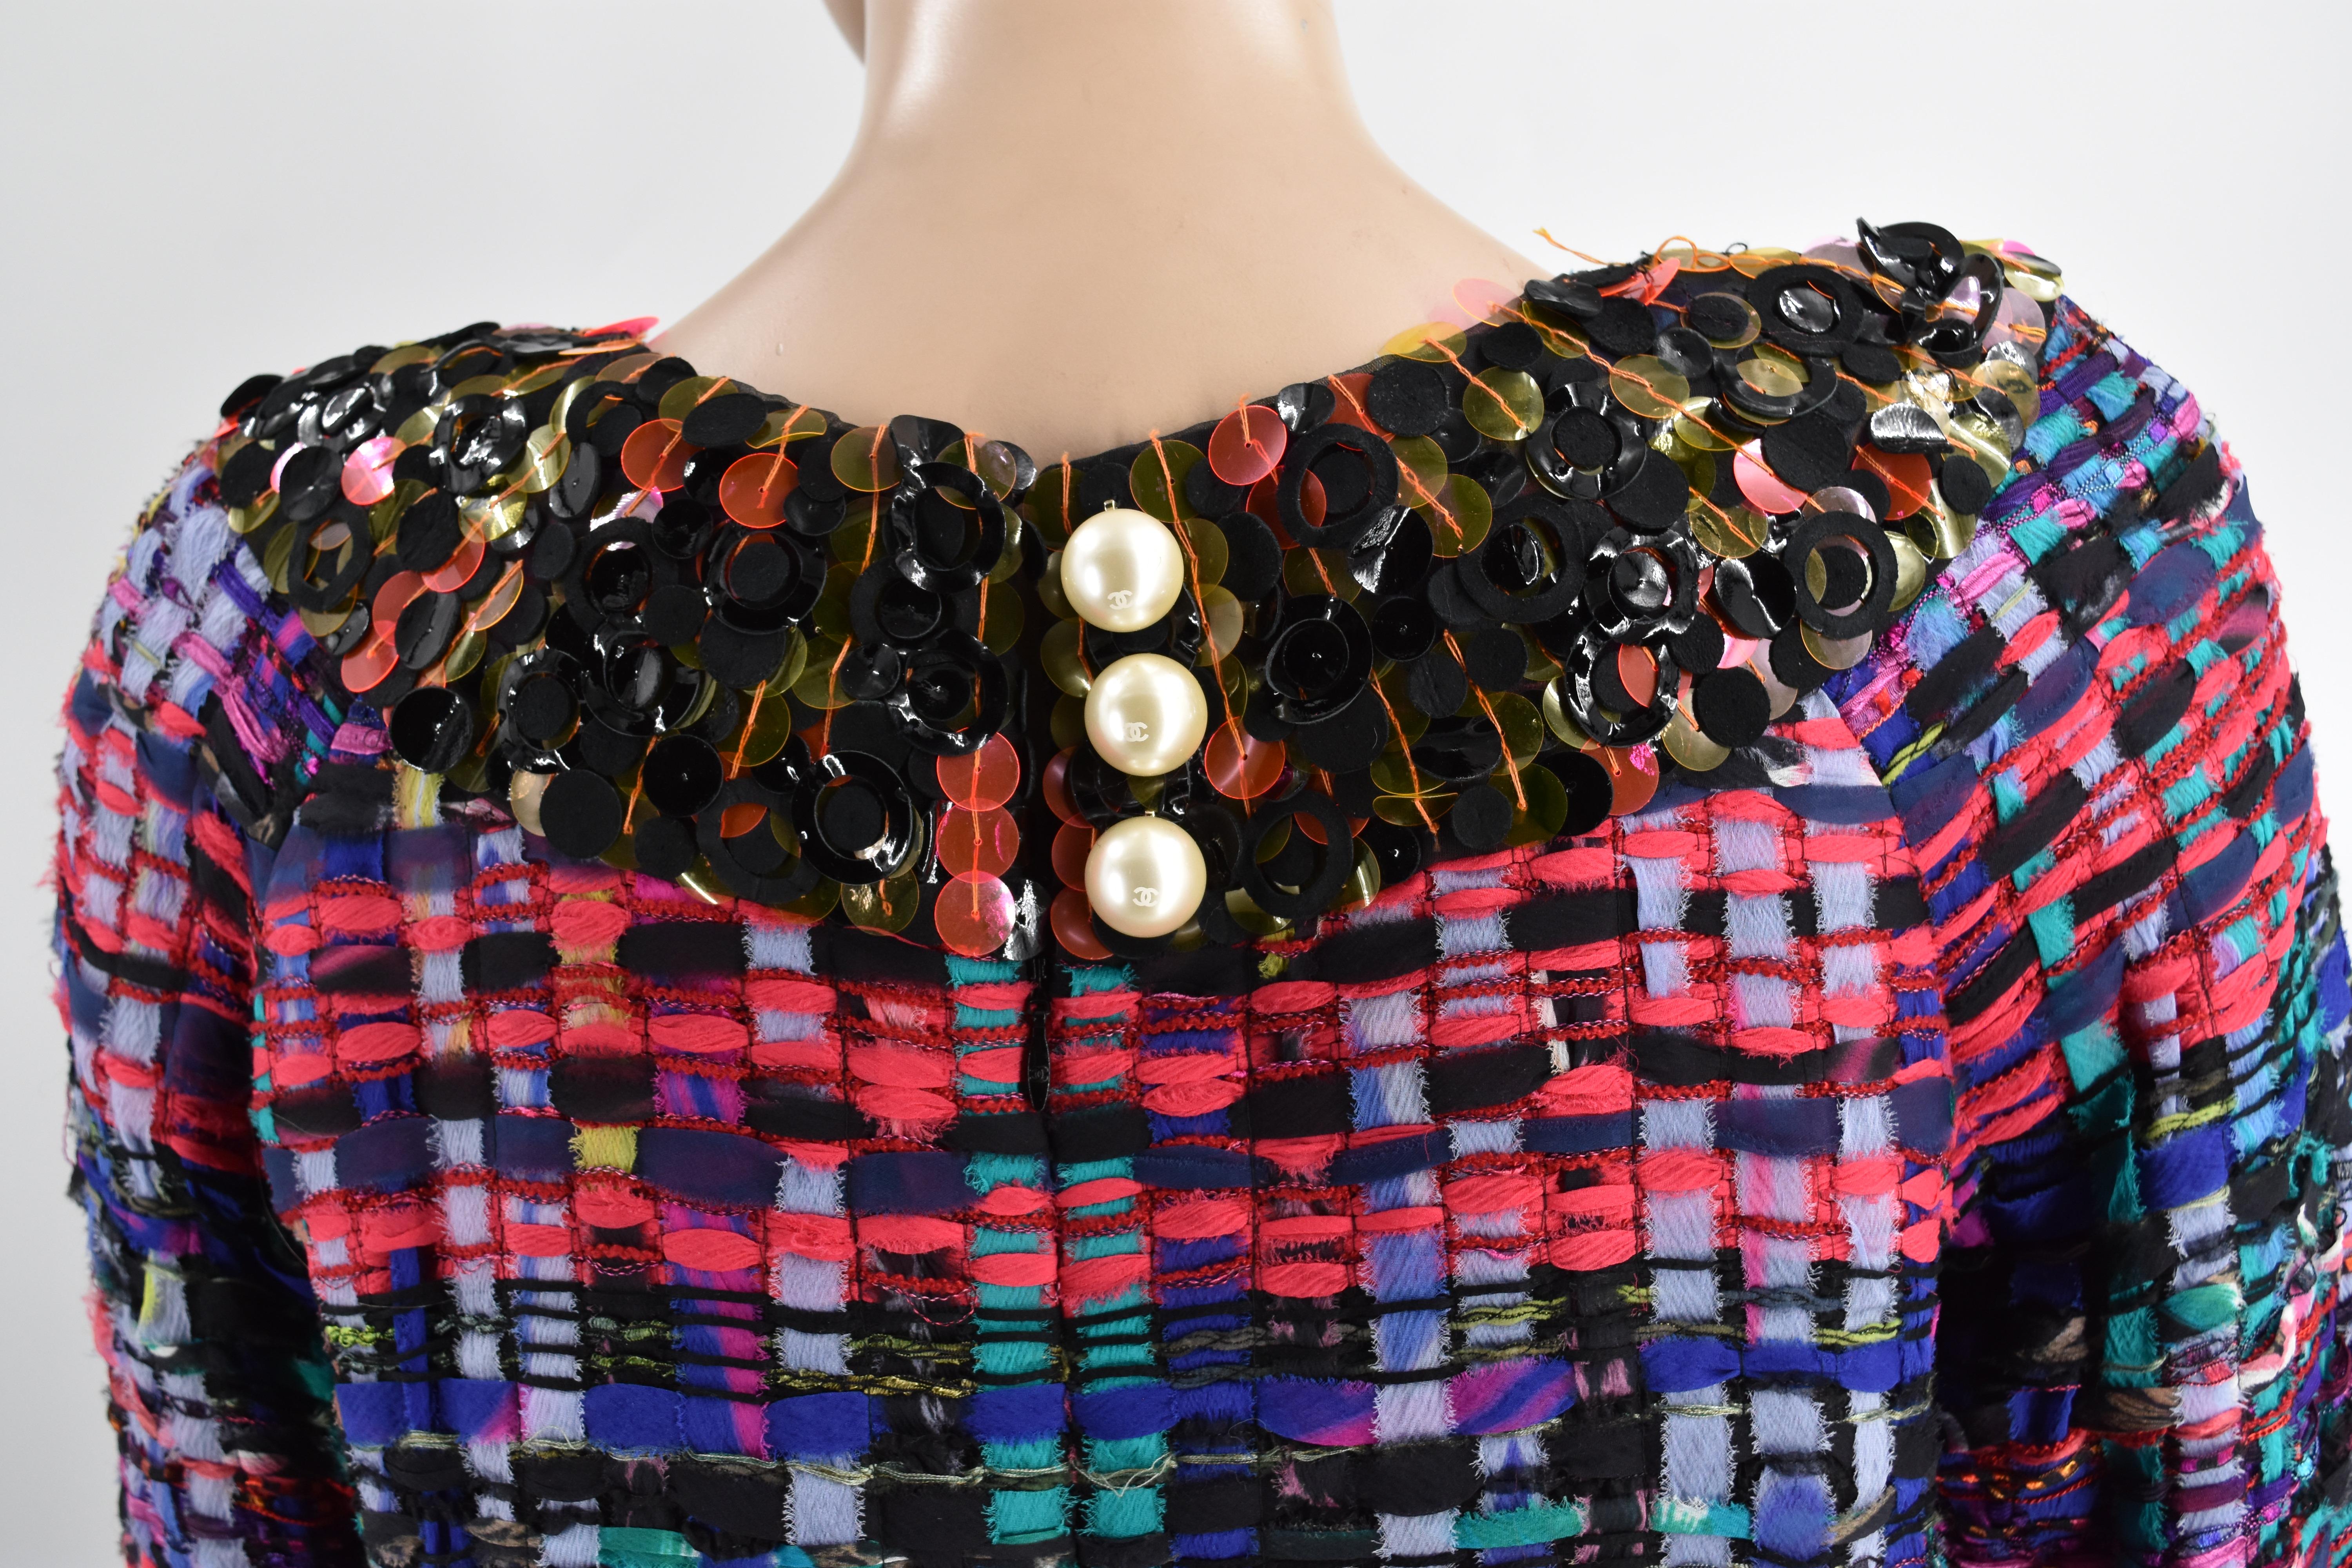 Chanel 13P Spring 2013 Wool Tweed Runway Sequins Faux Pearl Dress 38 New In New Condition For Sale In Merced, CA